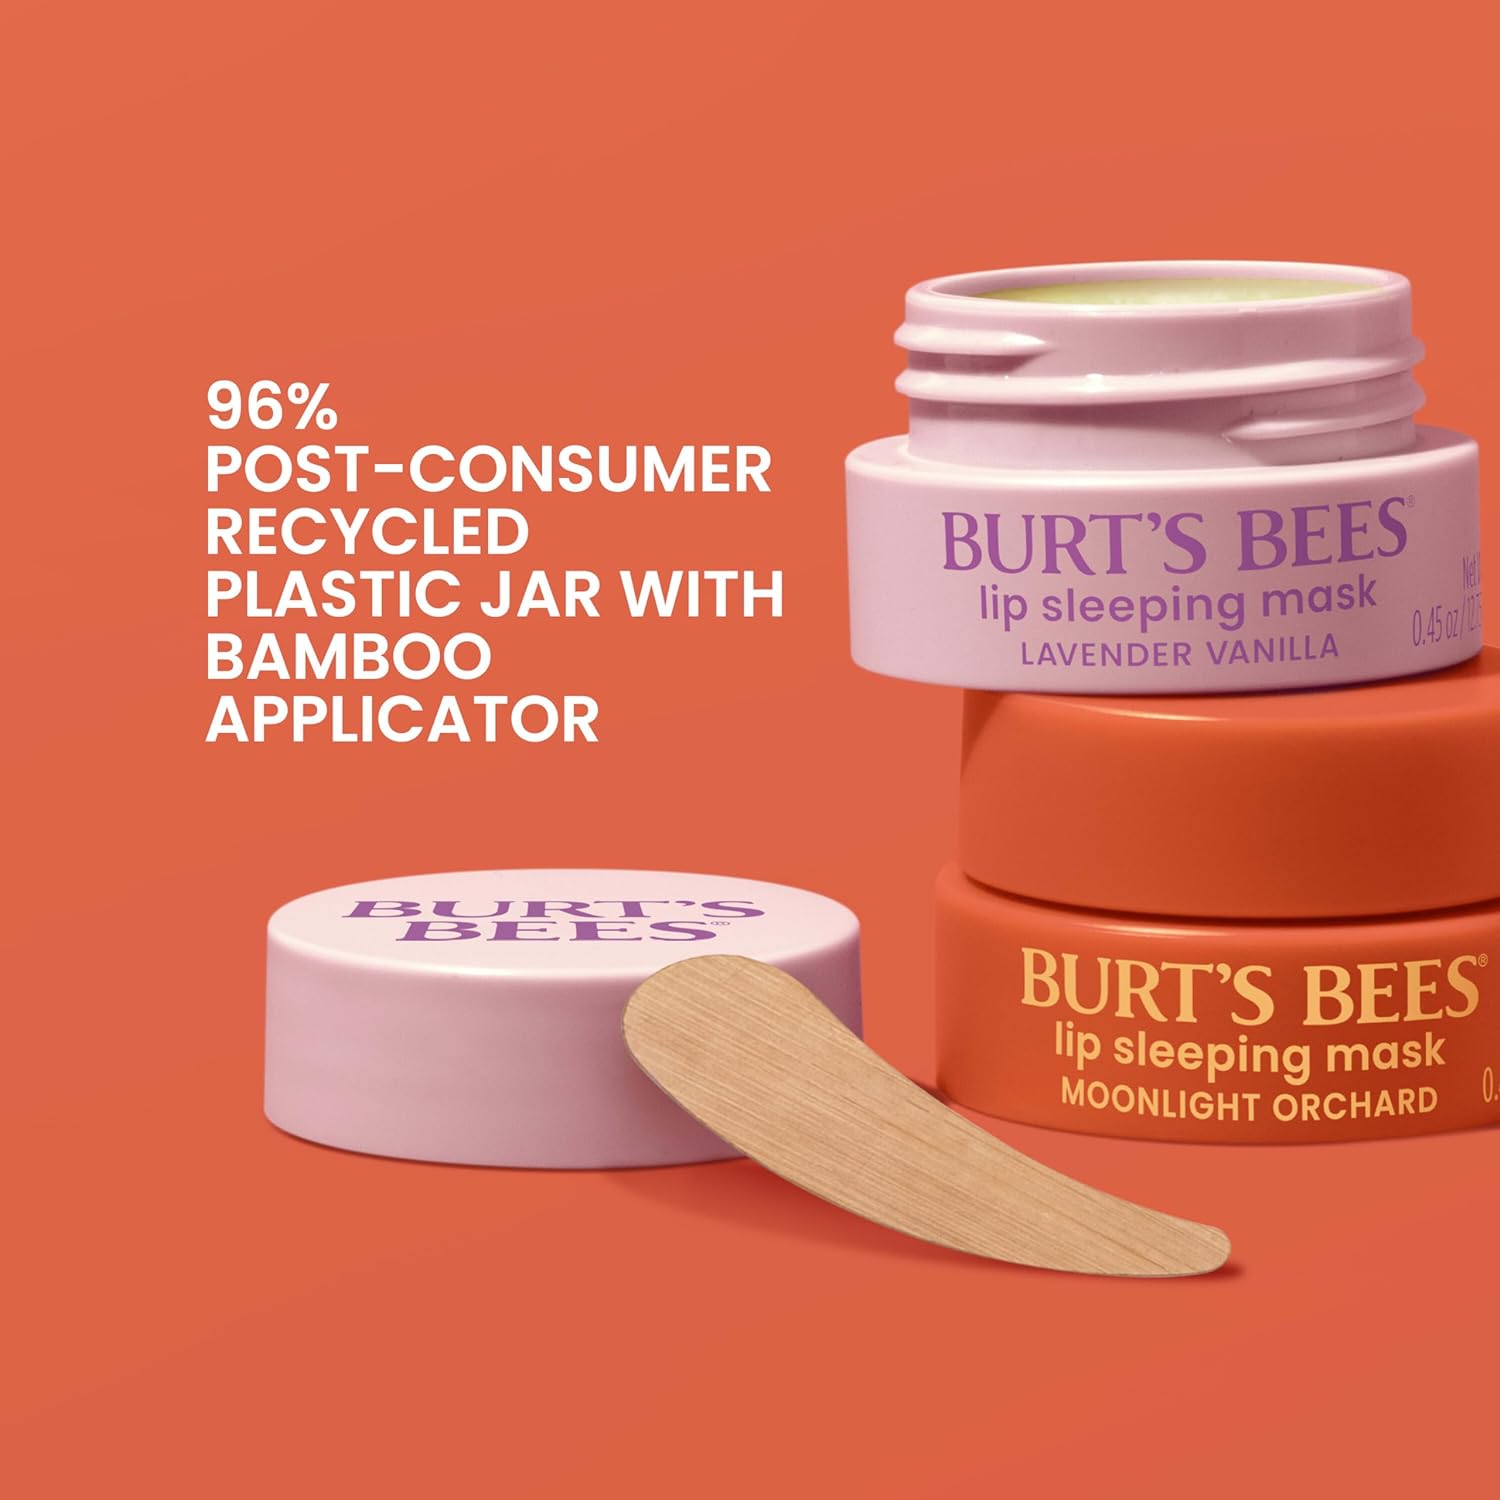 Burt’s Bees Moonlight Orchard Lip Sleeping Mask, With Hyaluronic Acid and Squalane Moisturizer To Instantly Hydrate Lips, Overnight Lip Mask, Lip Treatment, 0.45 oz. : Beauty & Personal Care